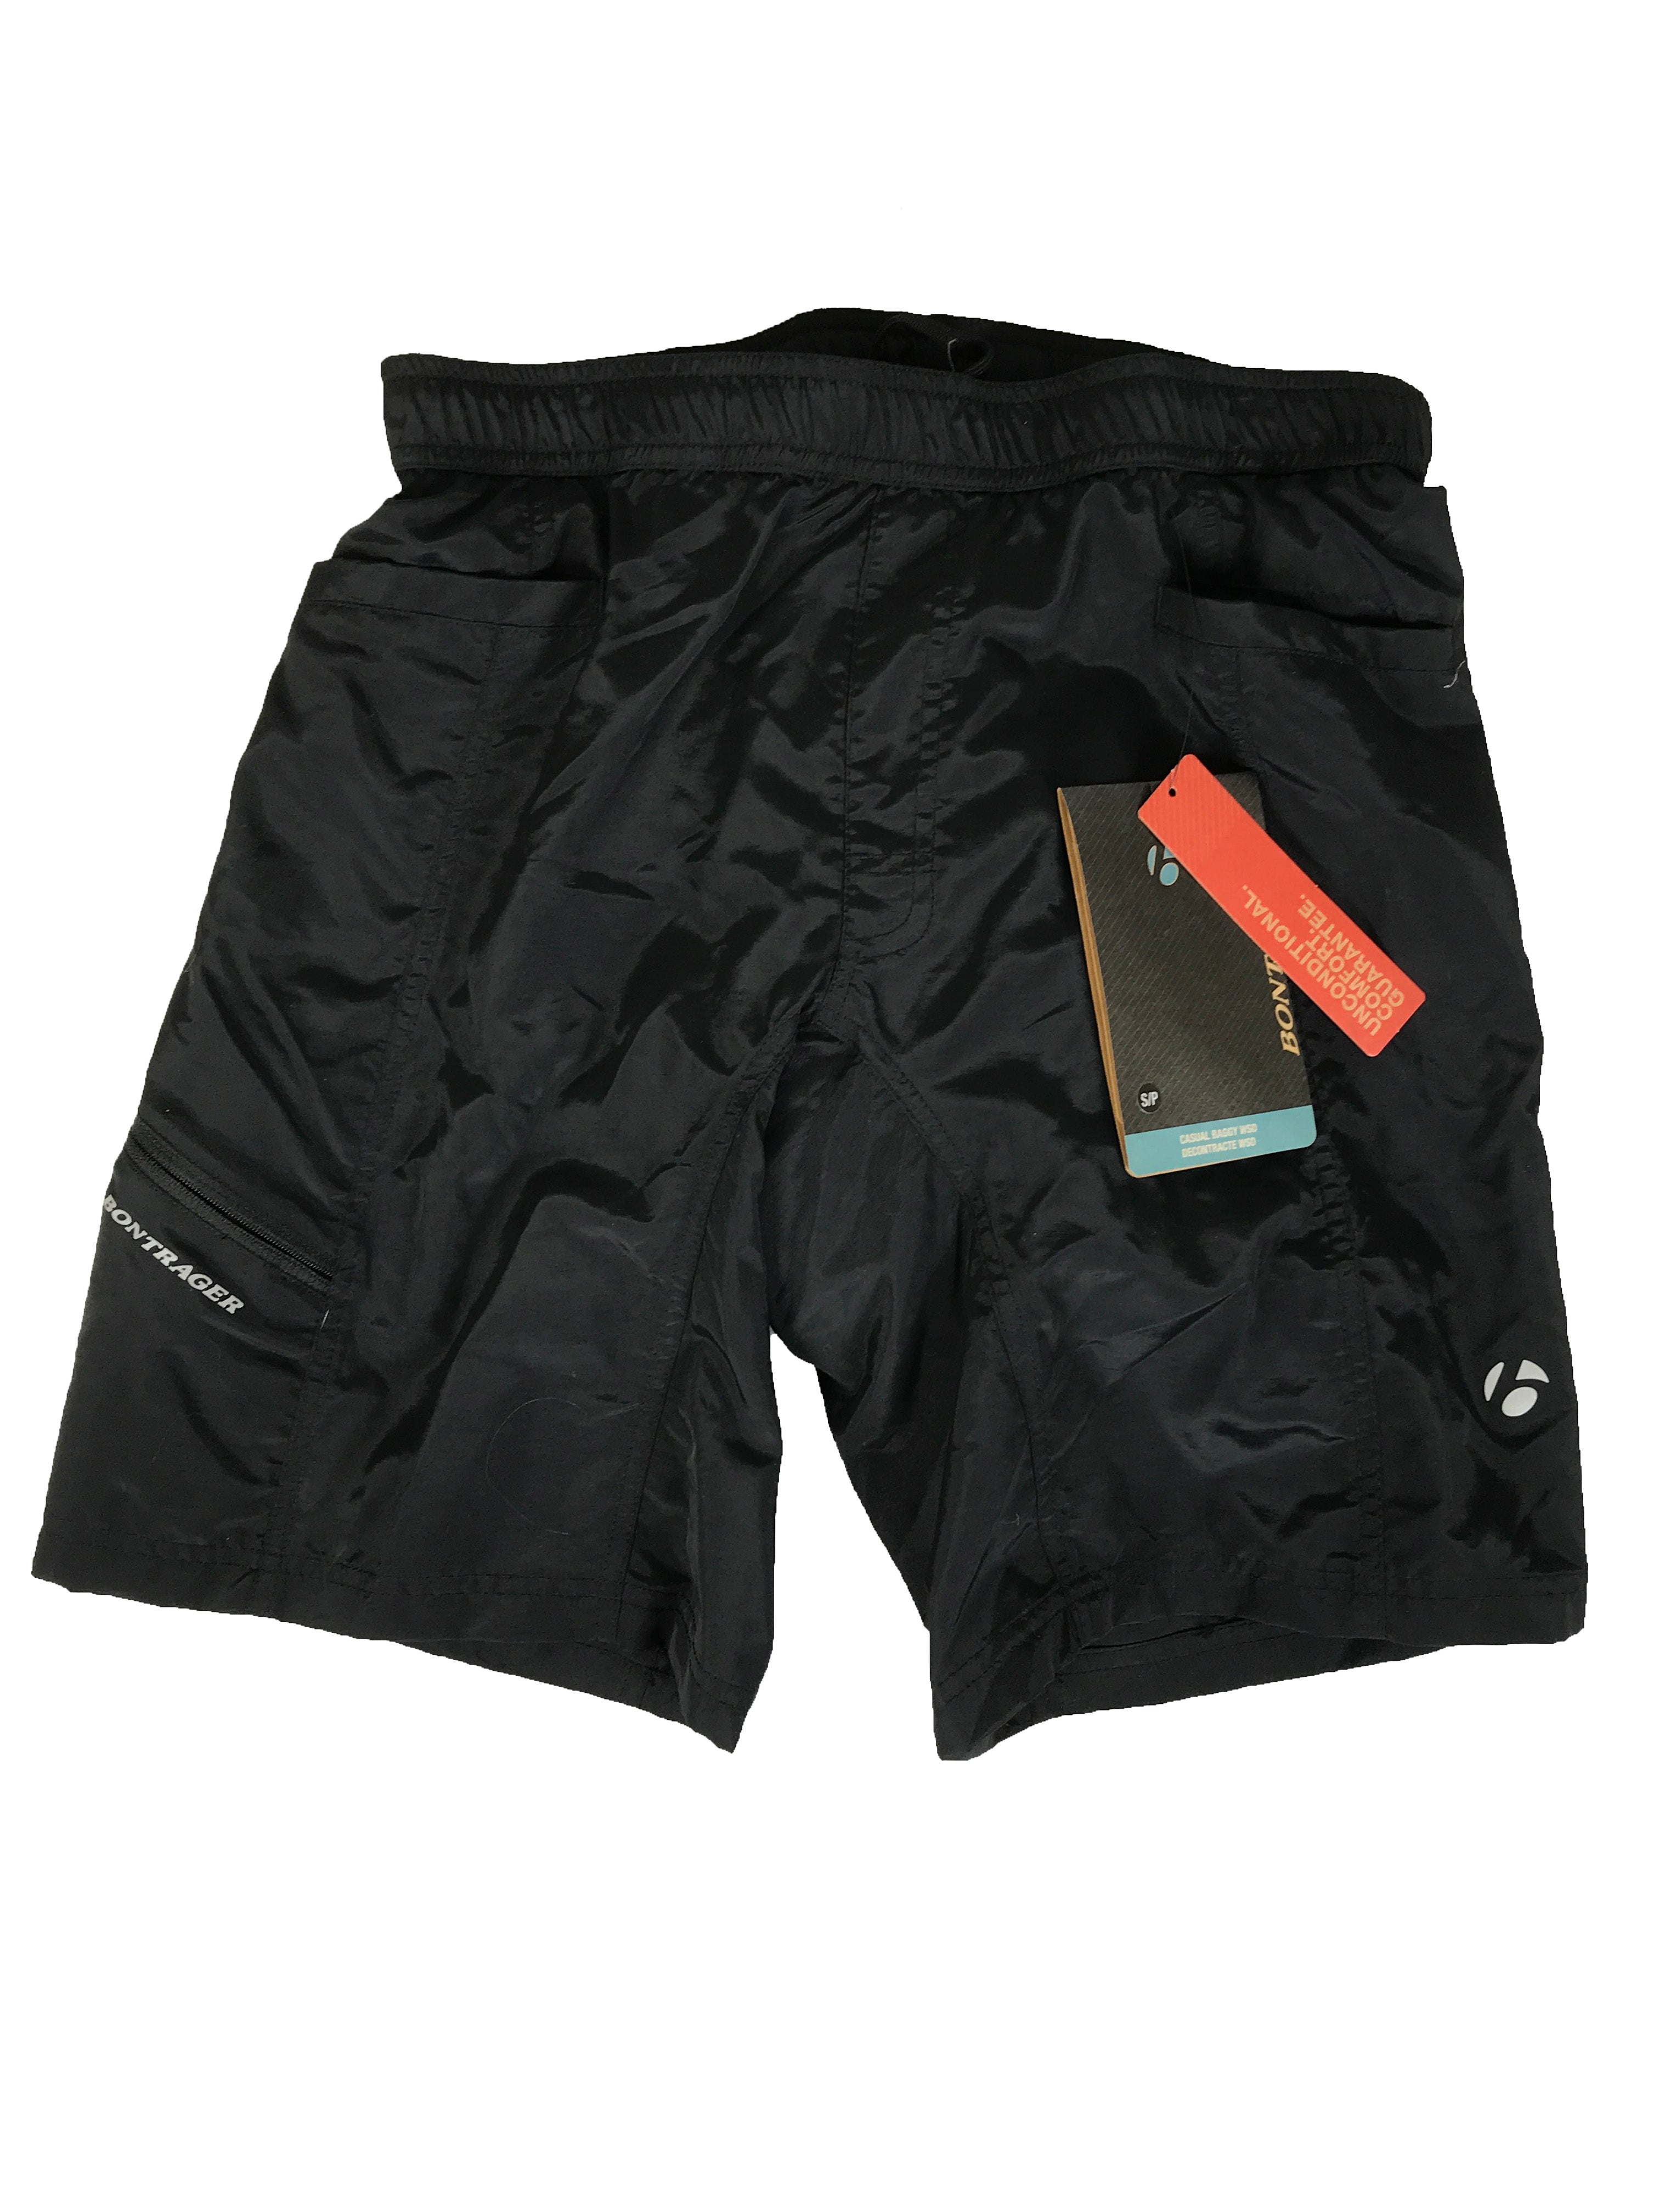 Bontrager Casual Baggy WSD Black Shorts with Chamois Women's Size S NWT